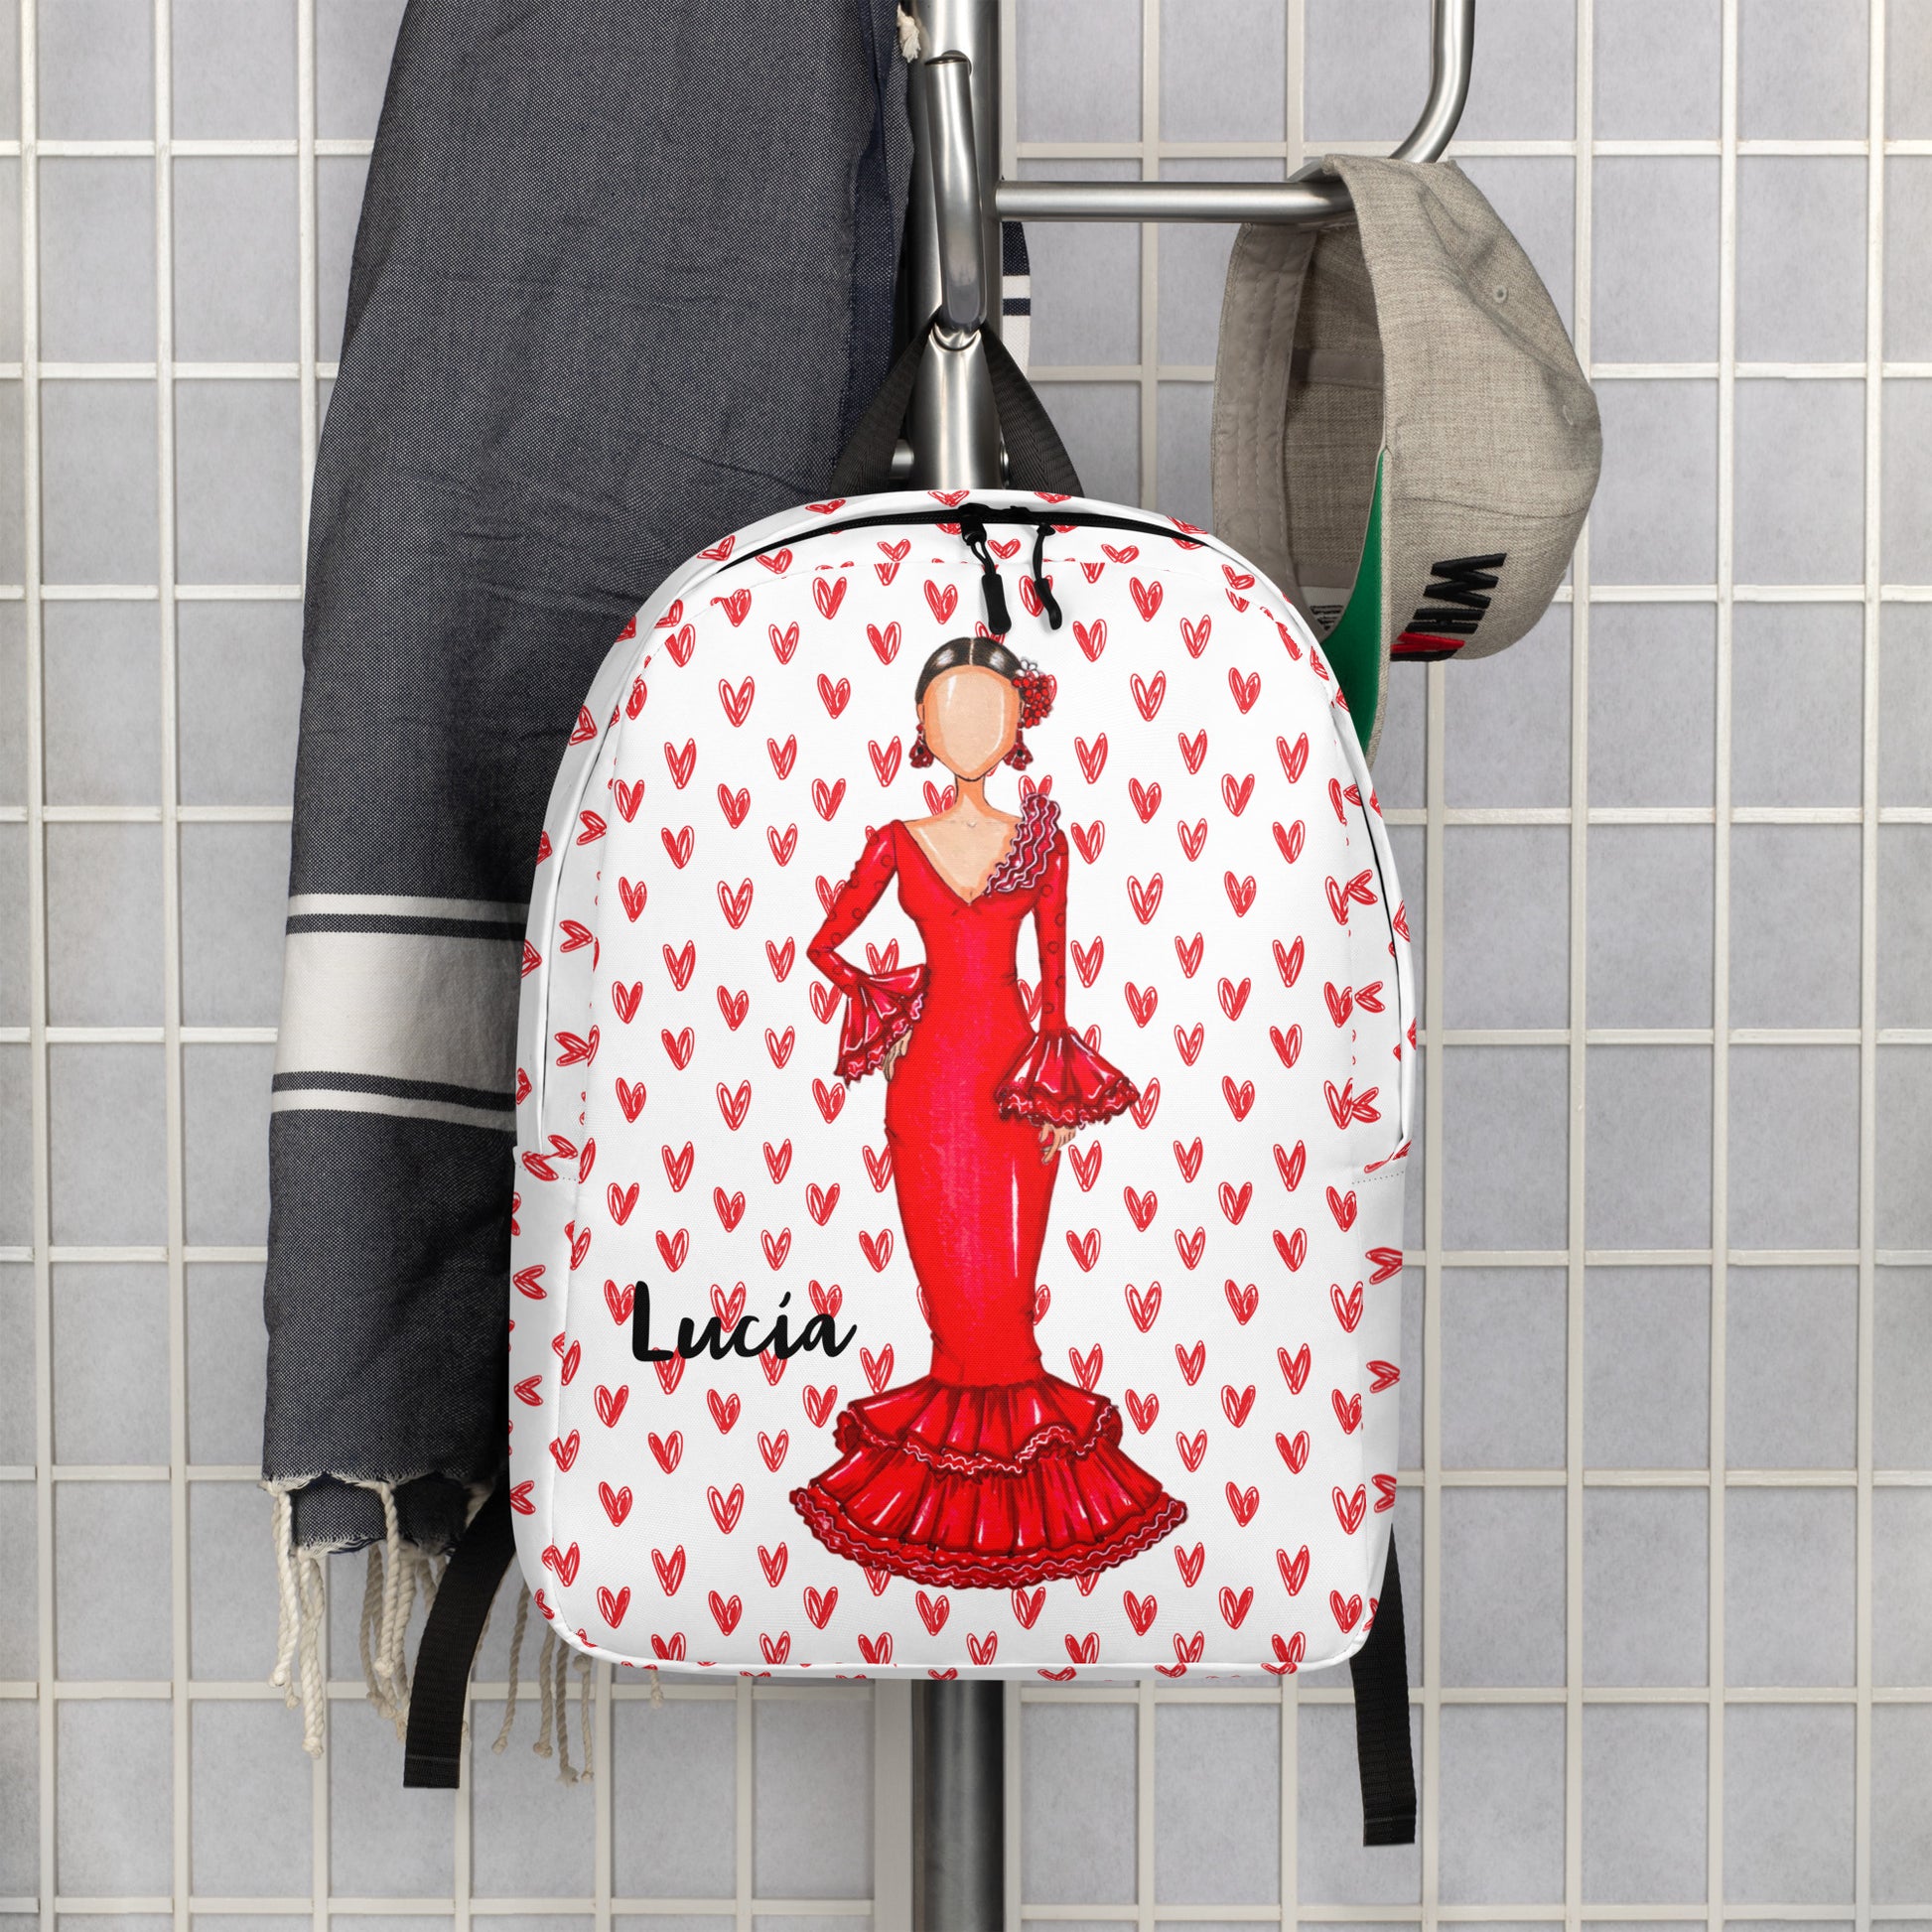 Flamenco Dancer Customizable Backpack, red dress with red hearts design. - IllustrArte